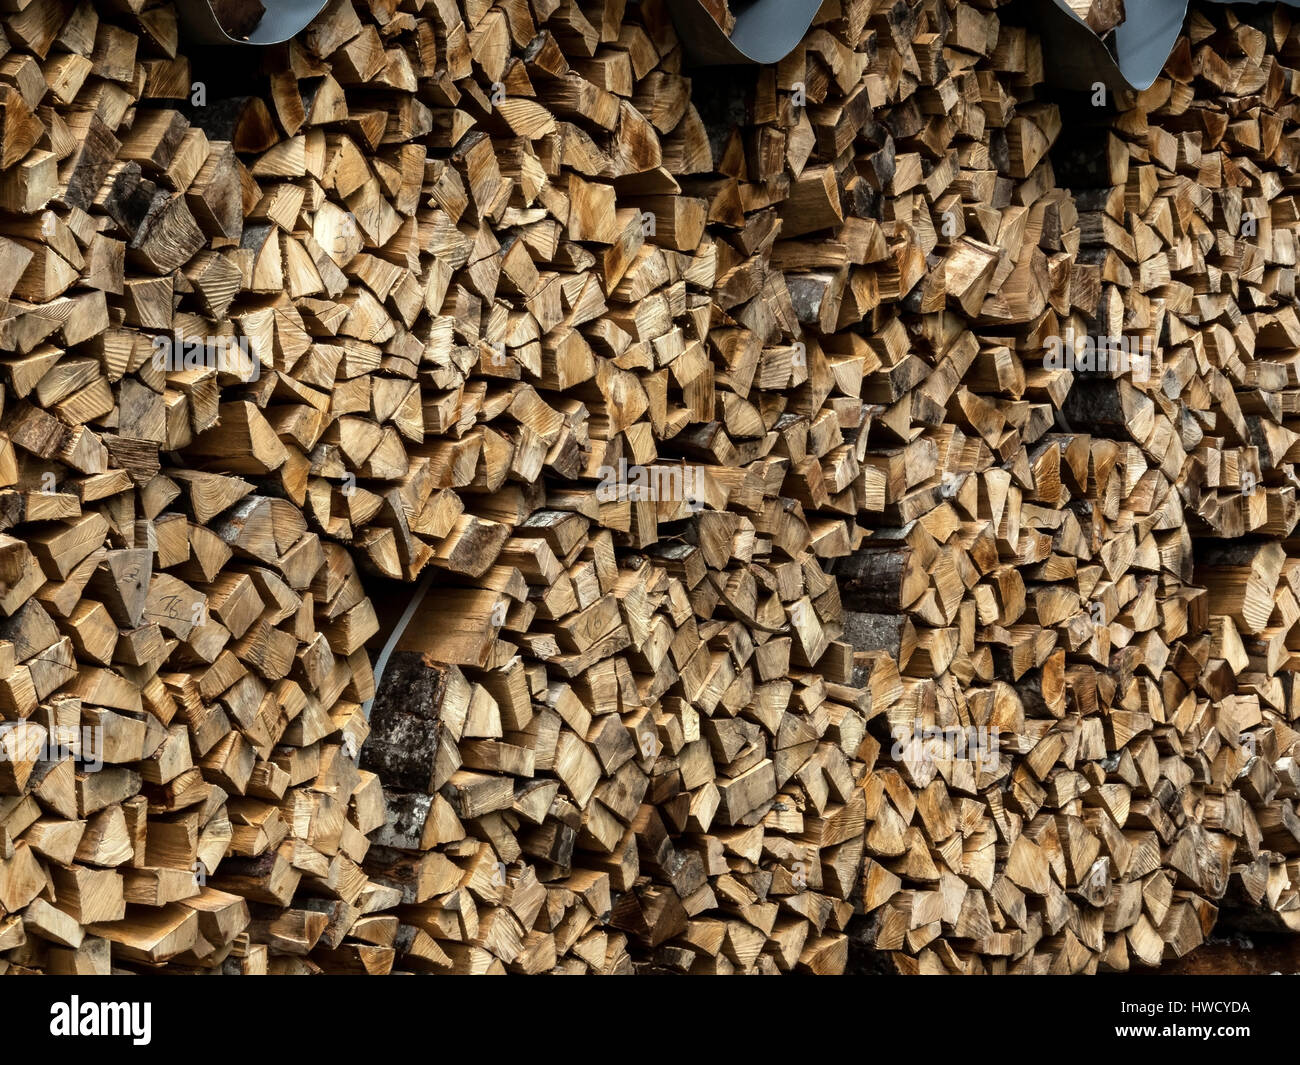 Stacked up wood as a firewood for the winter, Aufgestapeltes Holz als Brennholz für den Winter Stock Photo